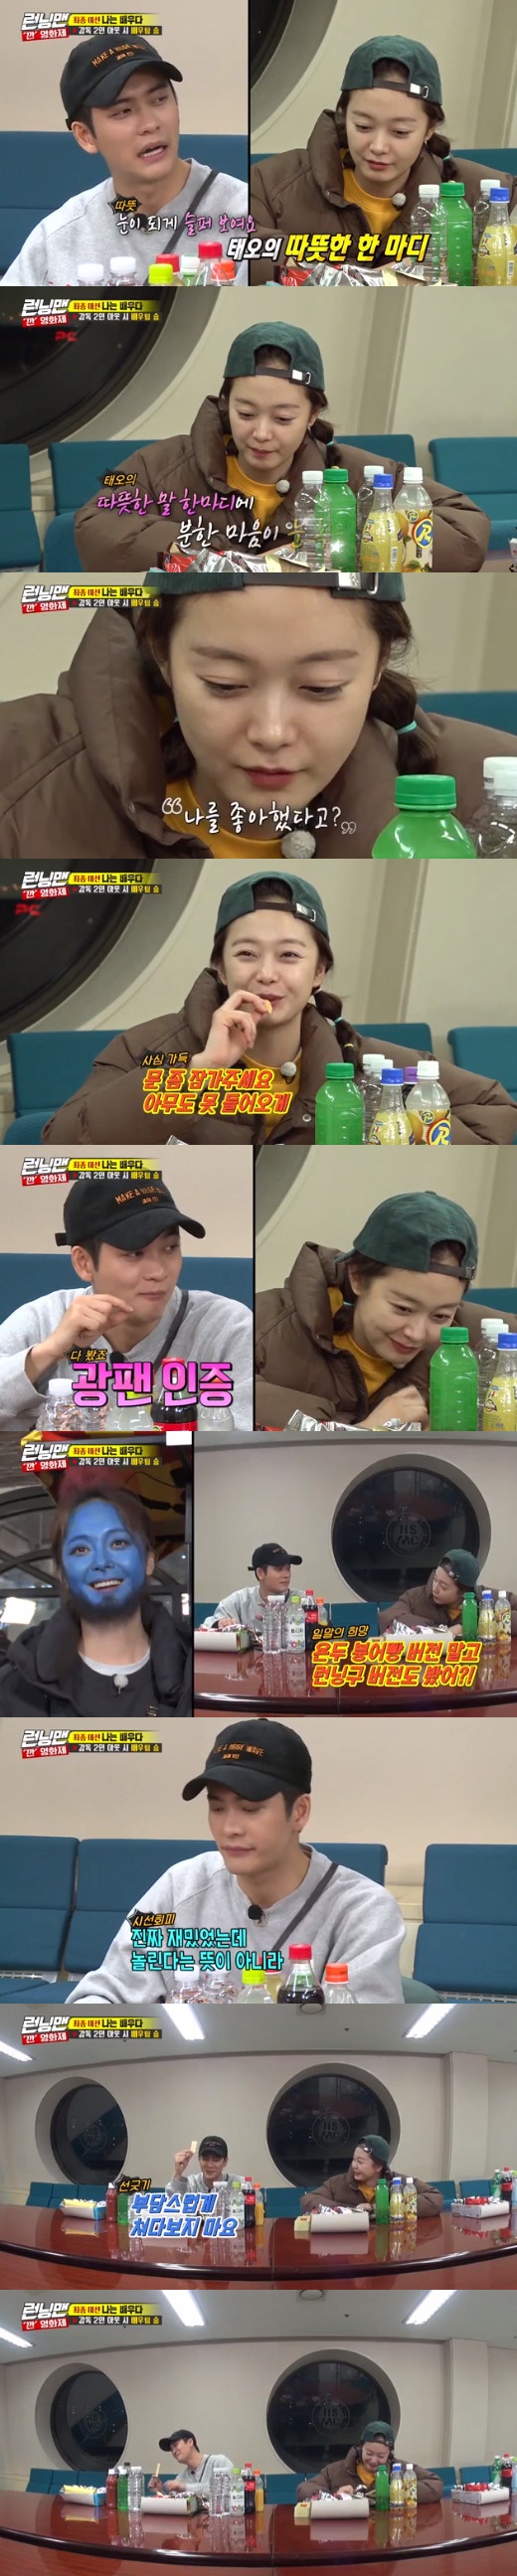 On SBS Running Man broadcasted on the afternoon of the 5th, the final race of Kangan Film Festival was drawn after the last time.On this day, Kang Tae-oh told Jeon So-min, I liked to be my sister originally. I was very attractive in Running Man.Jeon So-min said, It is good to have two hours and get out early, please lock the door so that no one can come in.Kang Tae-oh then caused a laugh by referring to the black history of Jeon So-min, saying, It was really funny when I sweated sideways.Did you see the Yondu makeup? asked Jeon So-min, who replied, I saw it all.So, Jeon So-min asked again, Can you marriage with such a woman? Kang Tae-oh added, Do not look at me burdenfully.